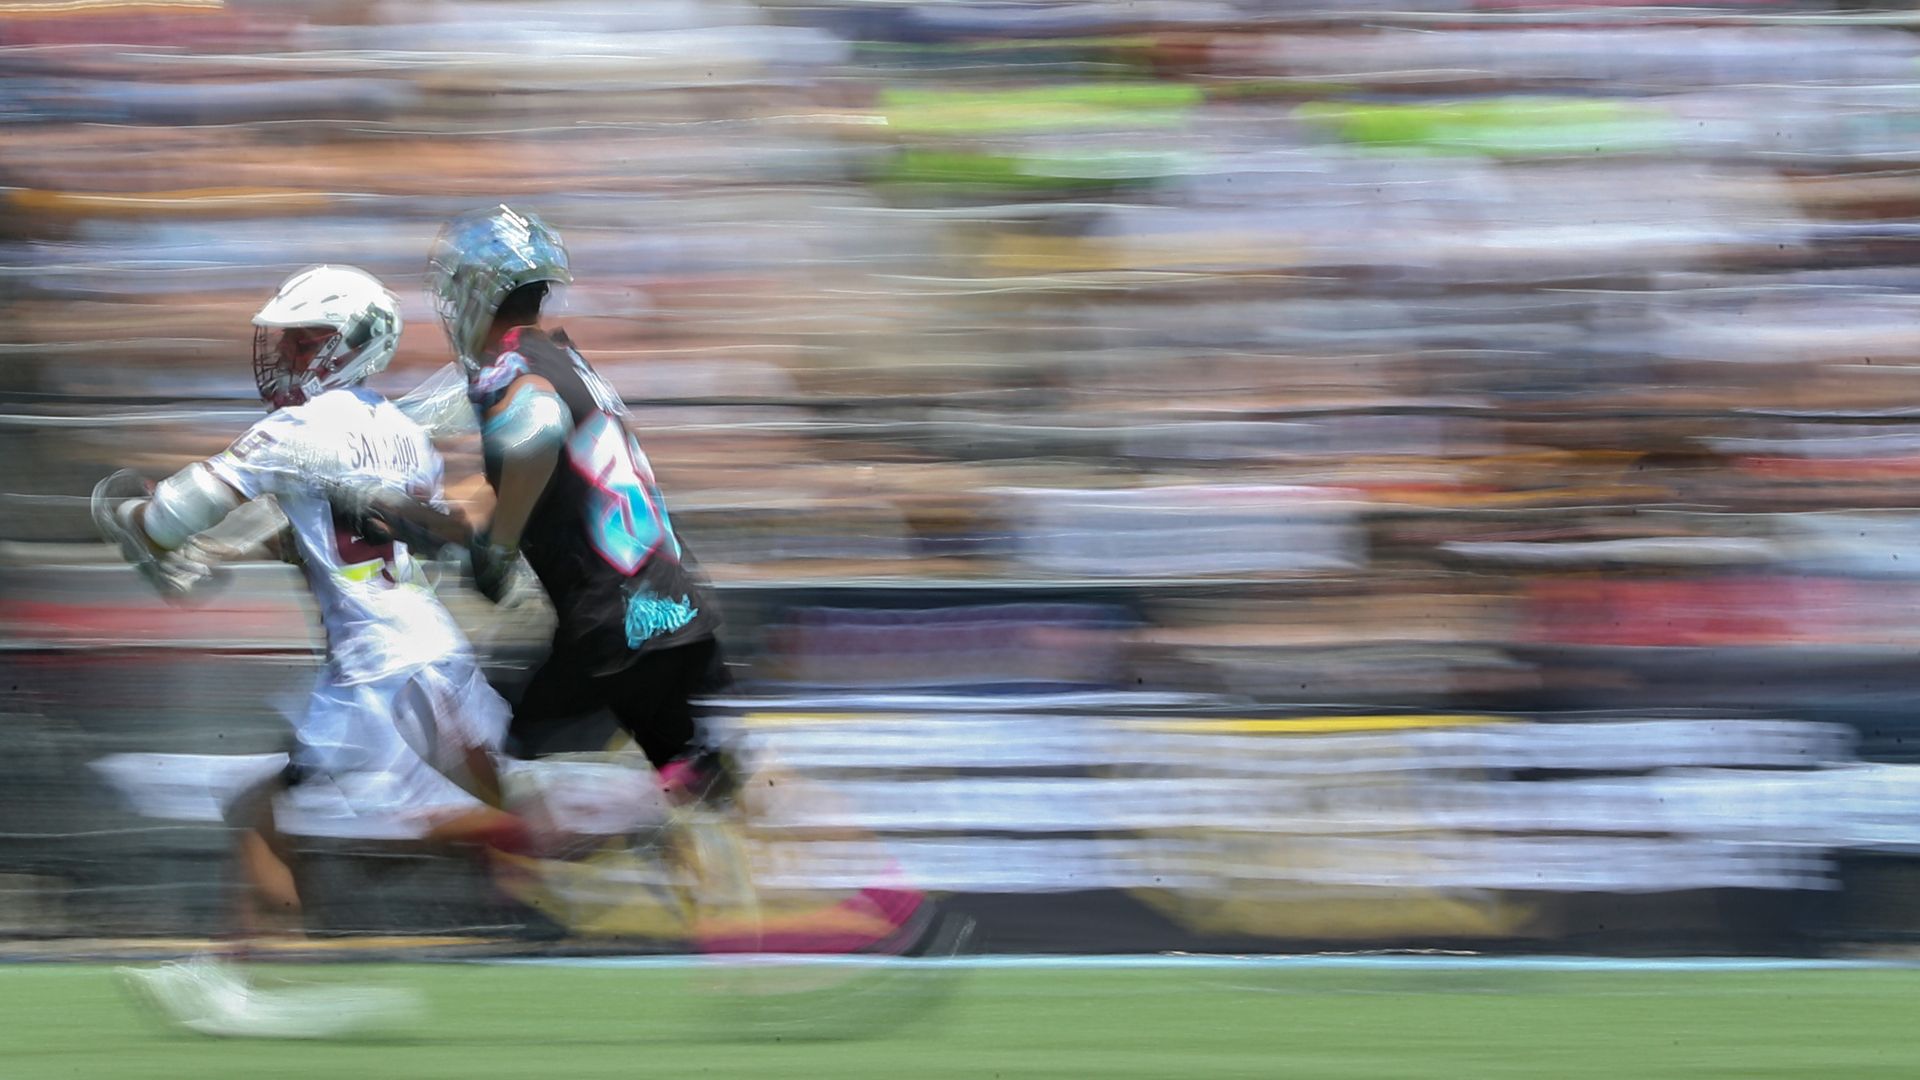 lacrosse players on blurry background